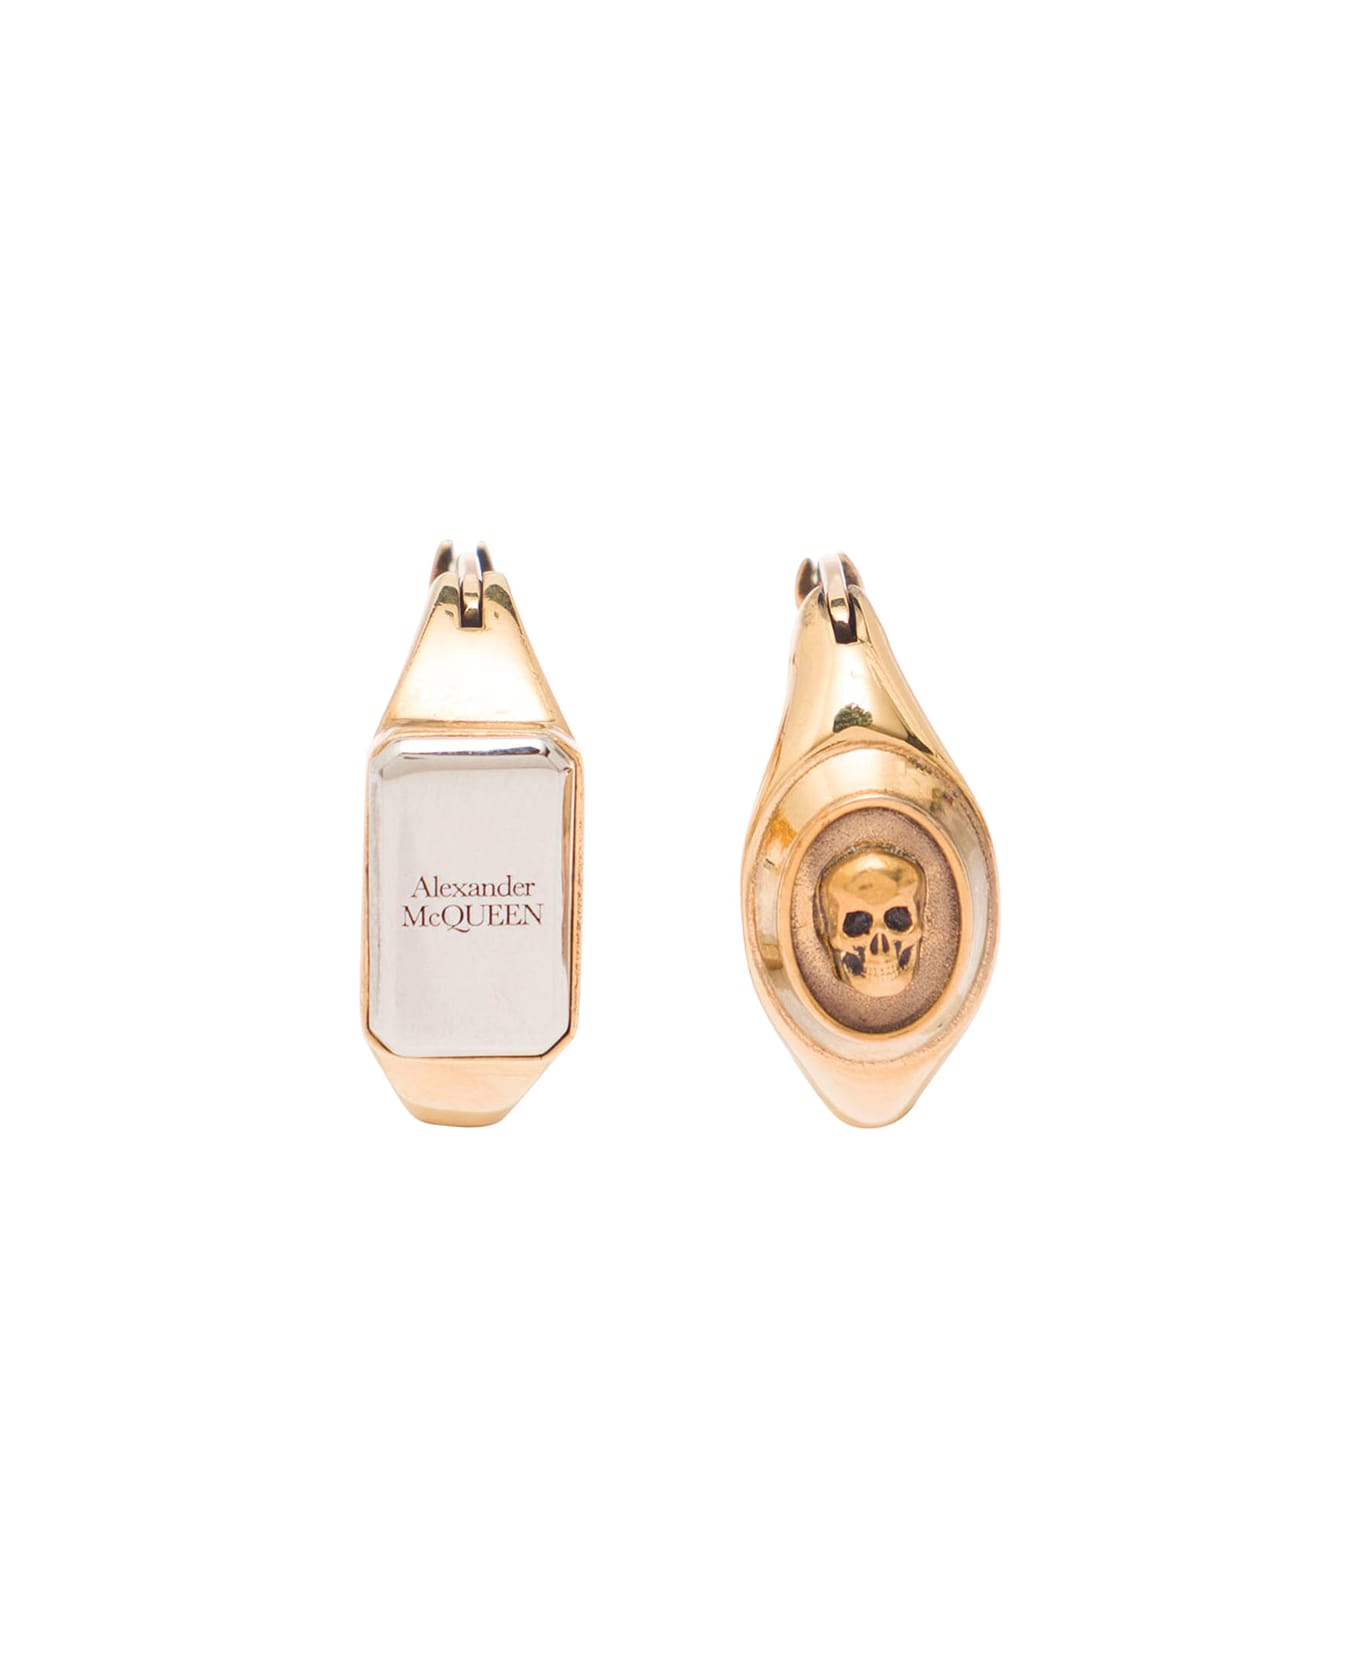 Alexander McQueen Gold-colored Hoops Earrings With Skull And Logo Engraved In Brass Woman - Metallic イヤリング